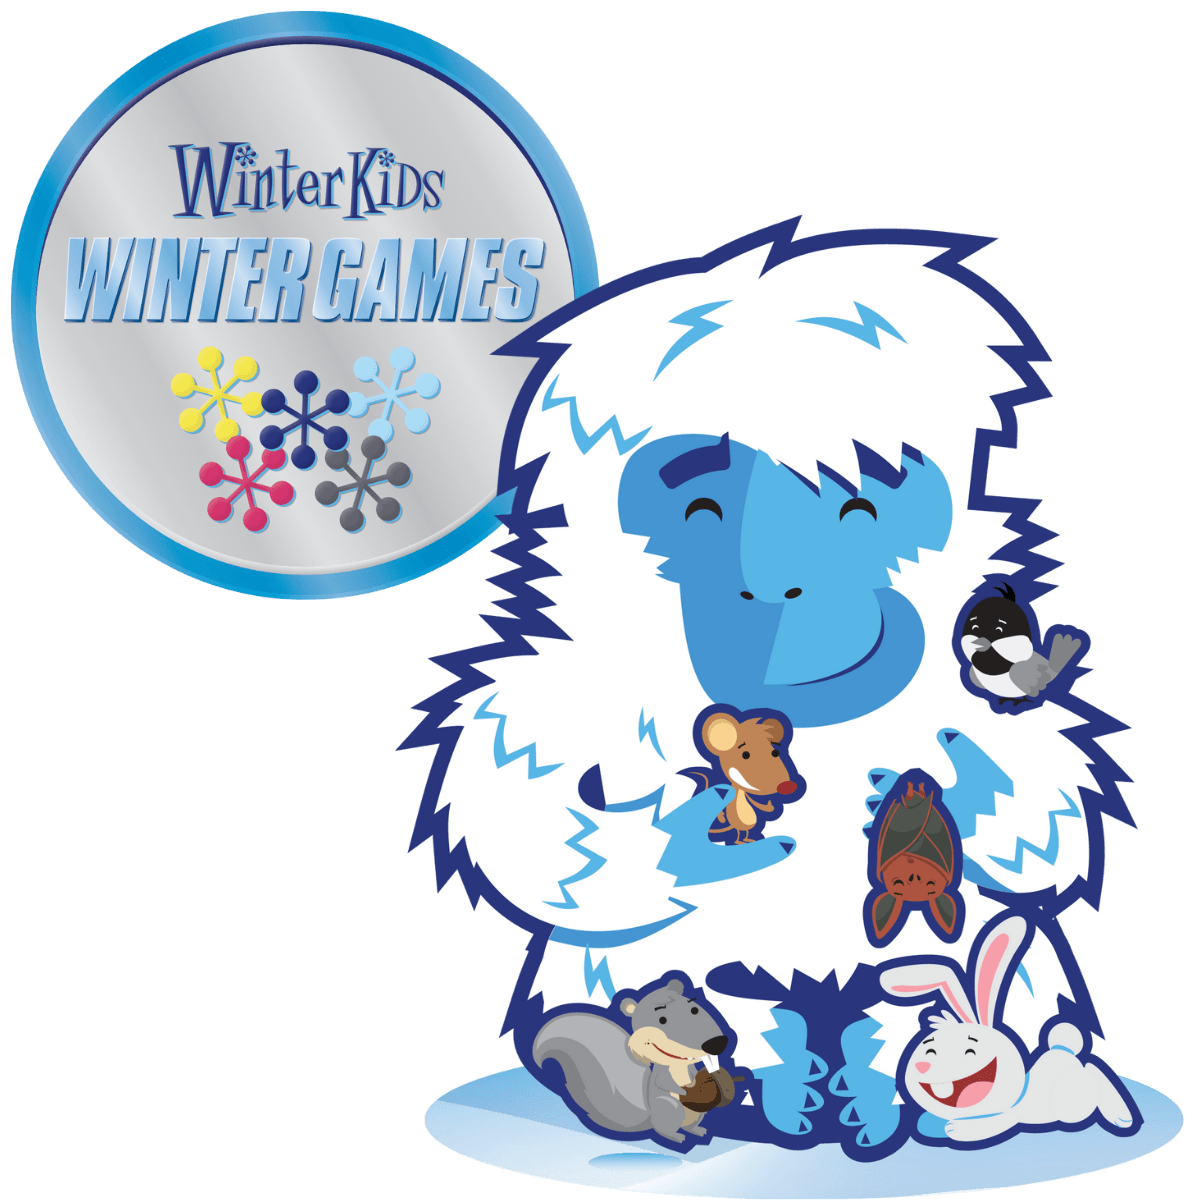 WinterKids Winter Games Yeti and Creatures with logo